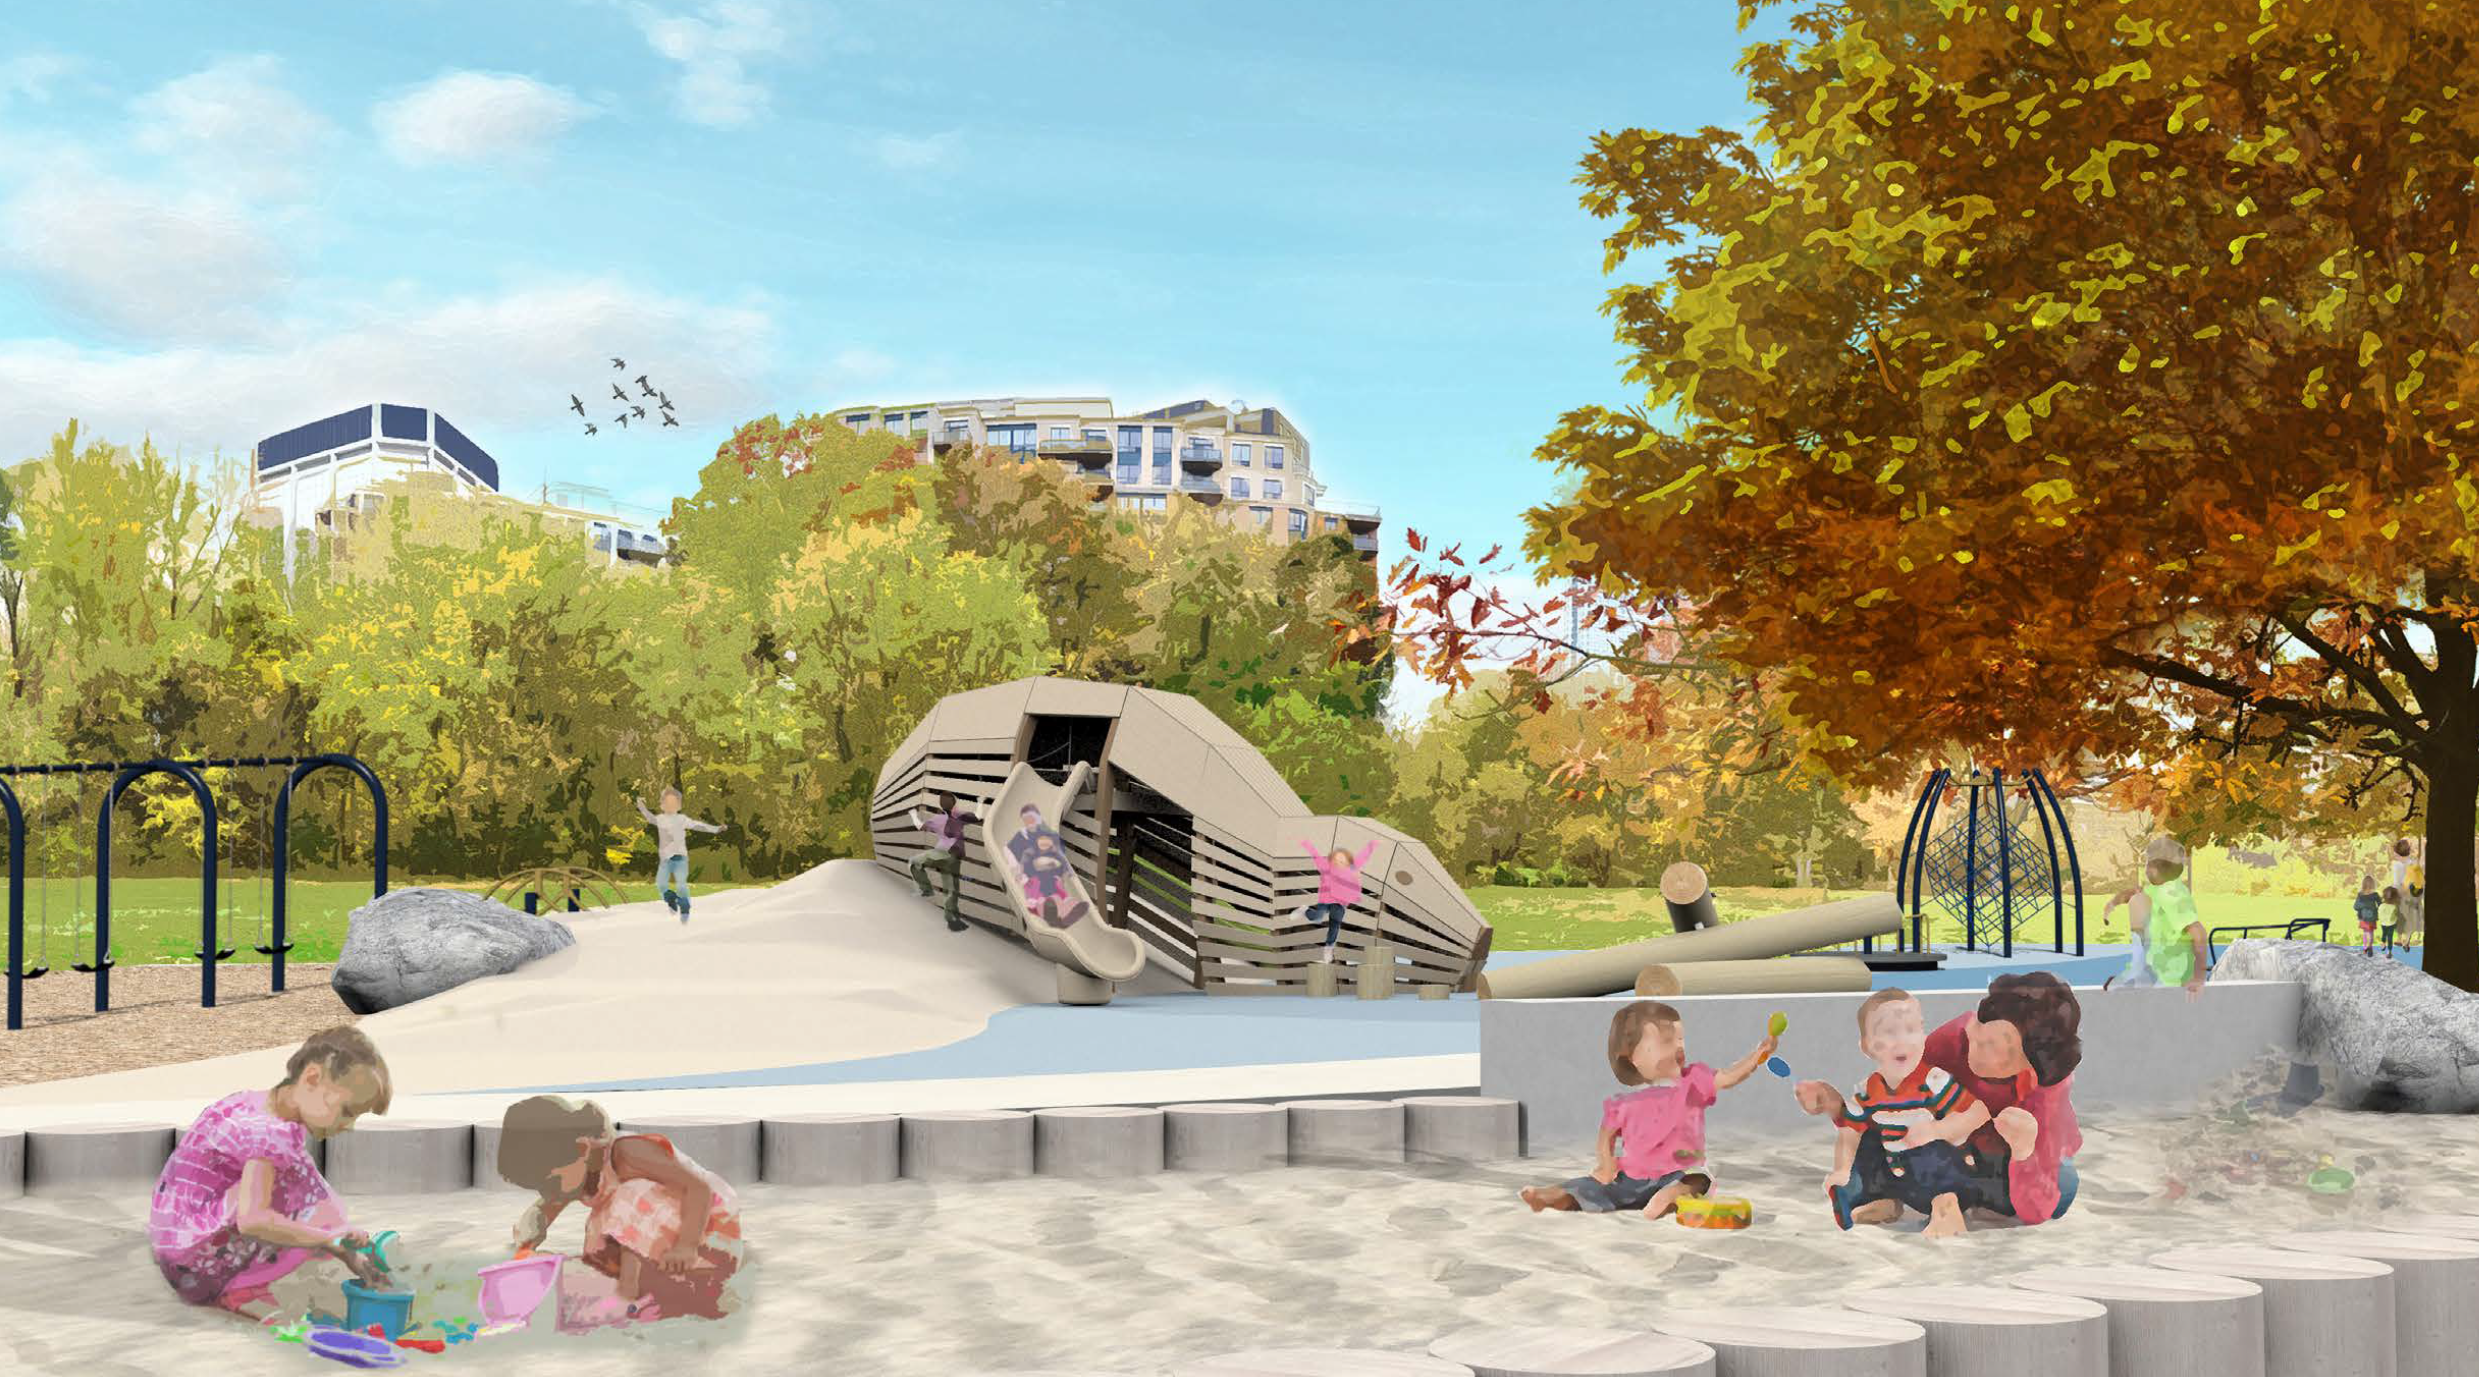 A view from the north east of the final design for the new Tom Riley Park Playground, which has been refined based on community feedback. It will be beaver themed and include the play features listed below.